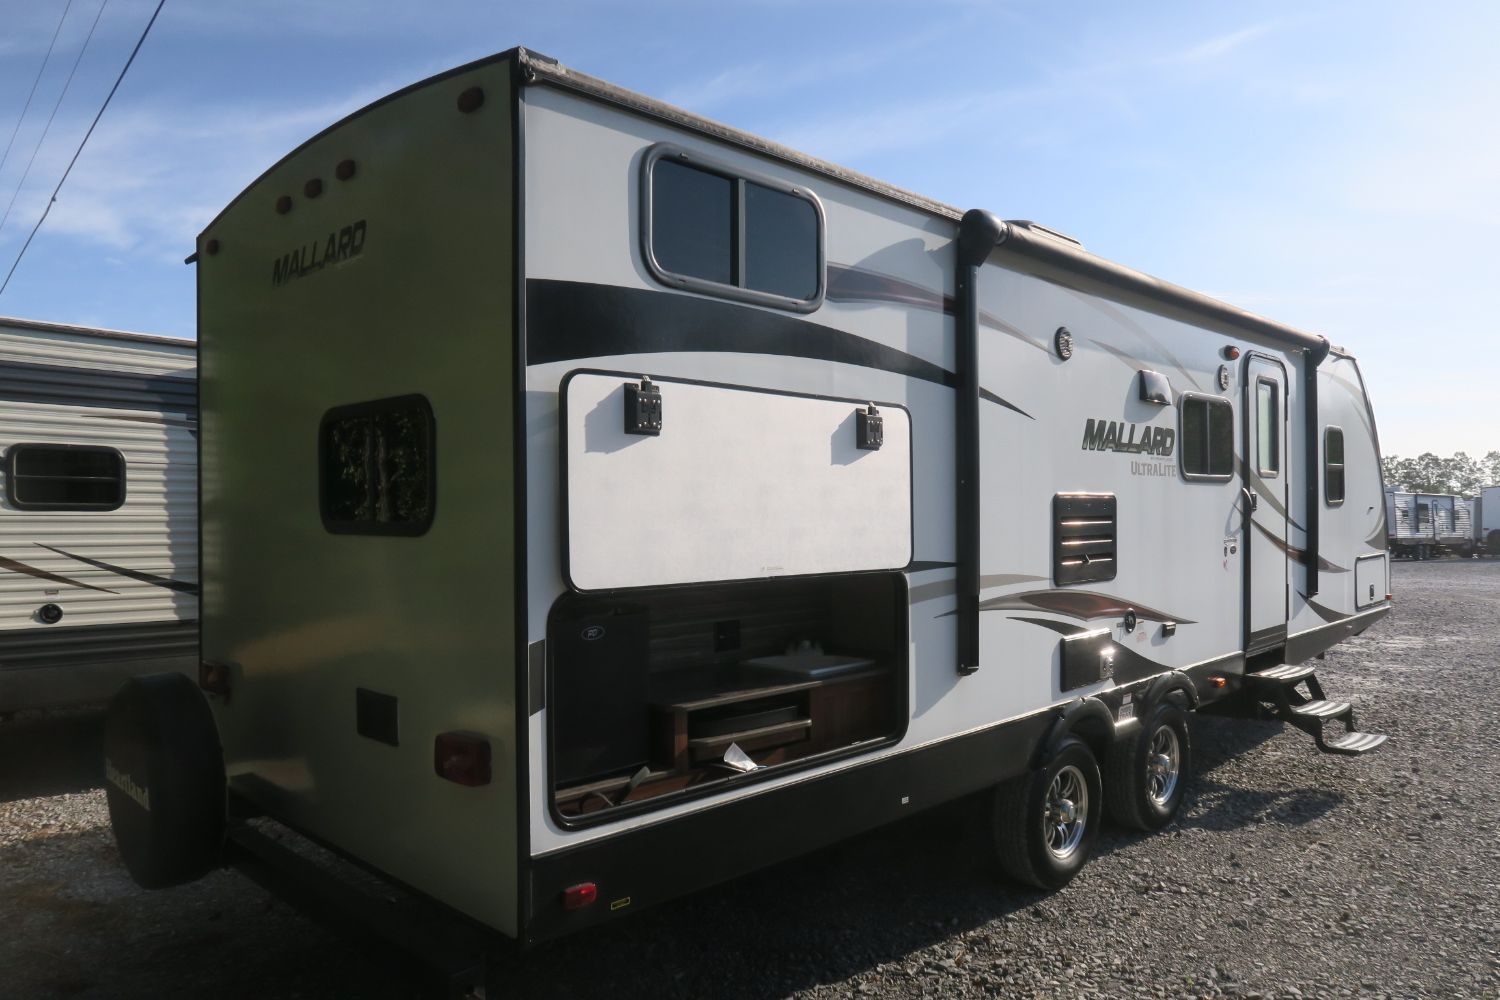 USED 2018 MALLARD M26 Overview Berryland Campers